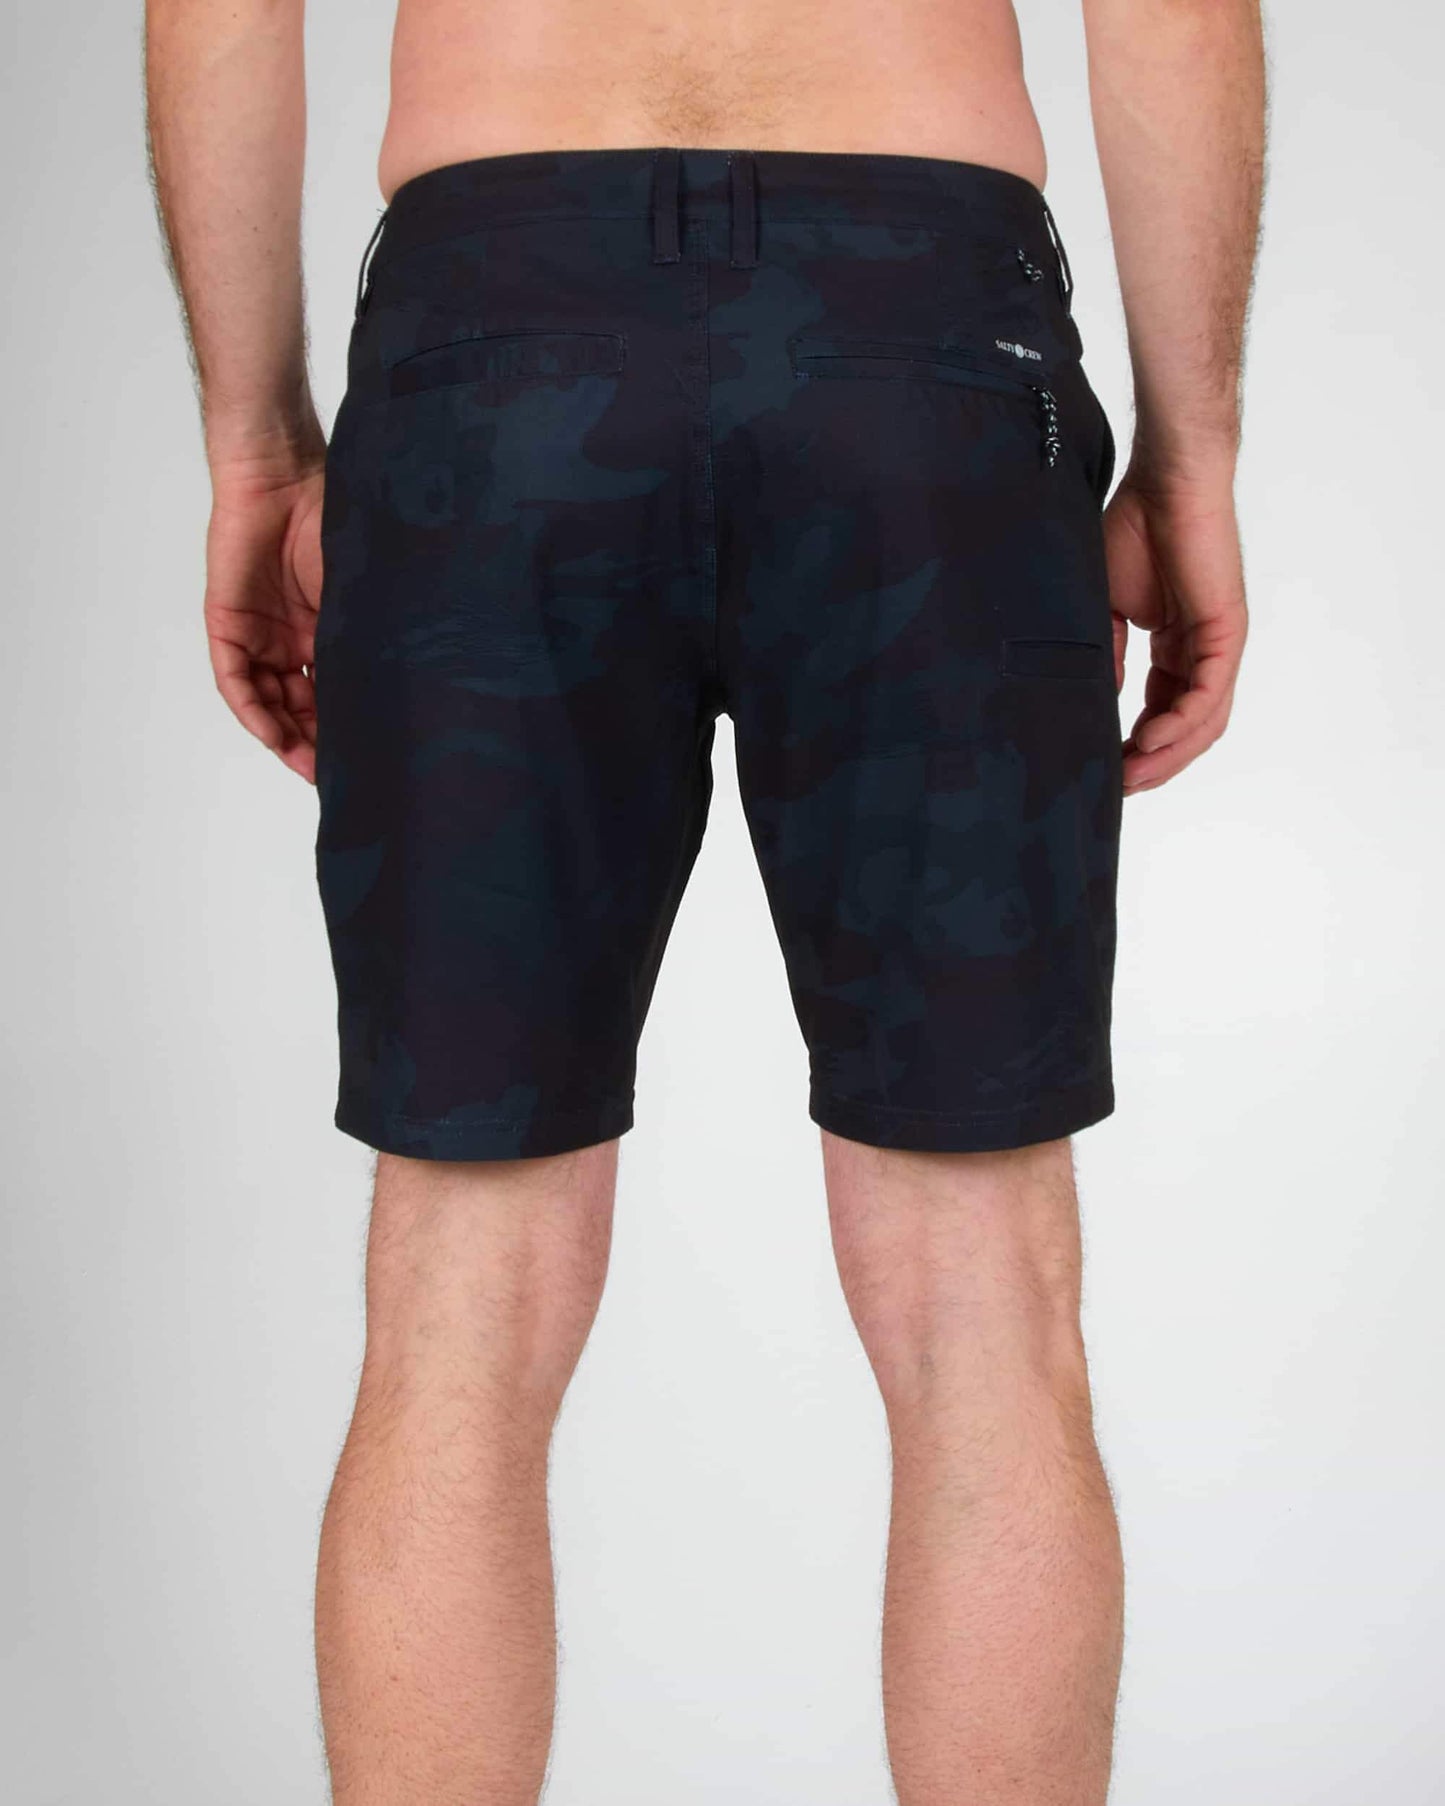 Salty Crew Uomini - Drifter 2 Perforated - Black Camo